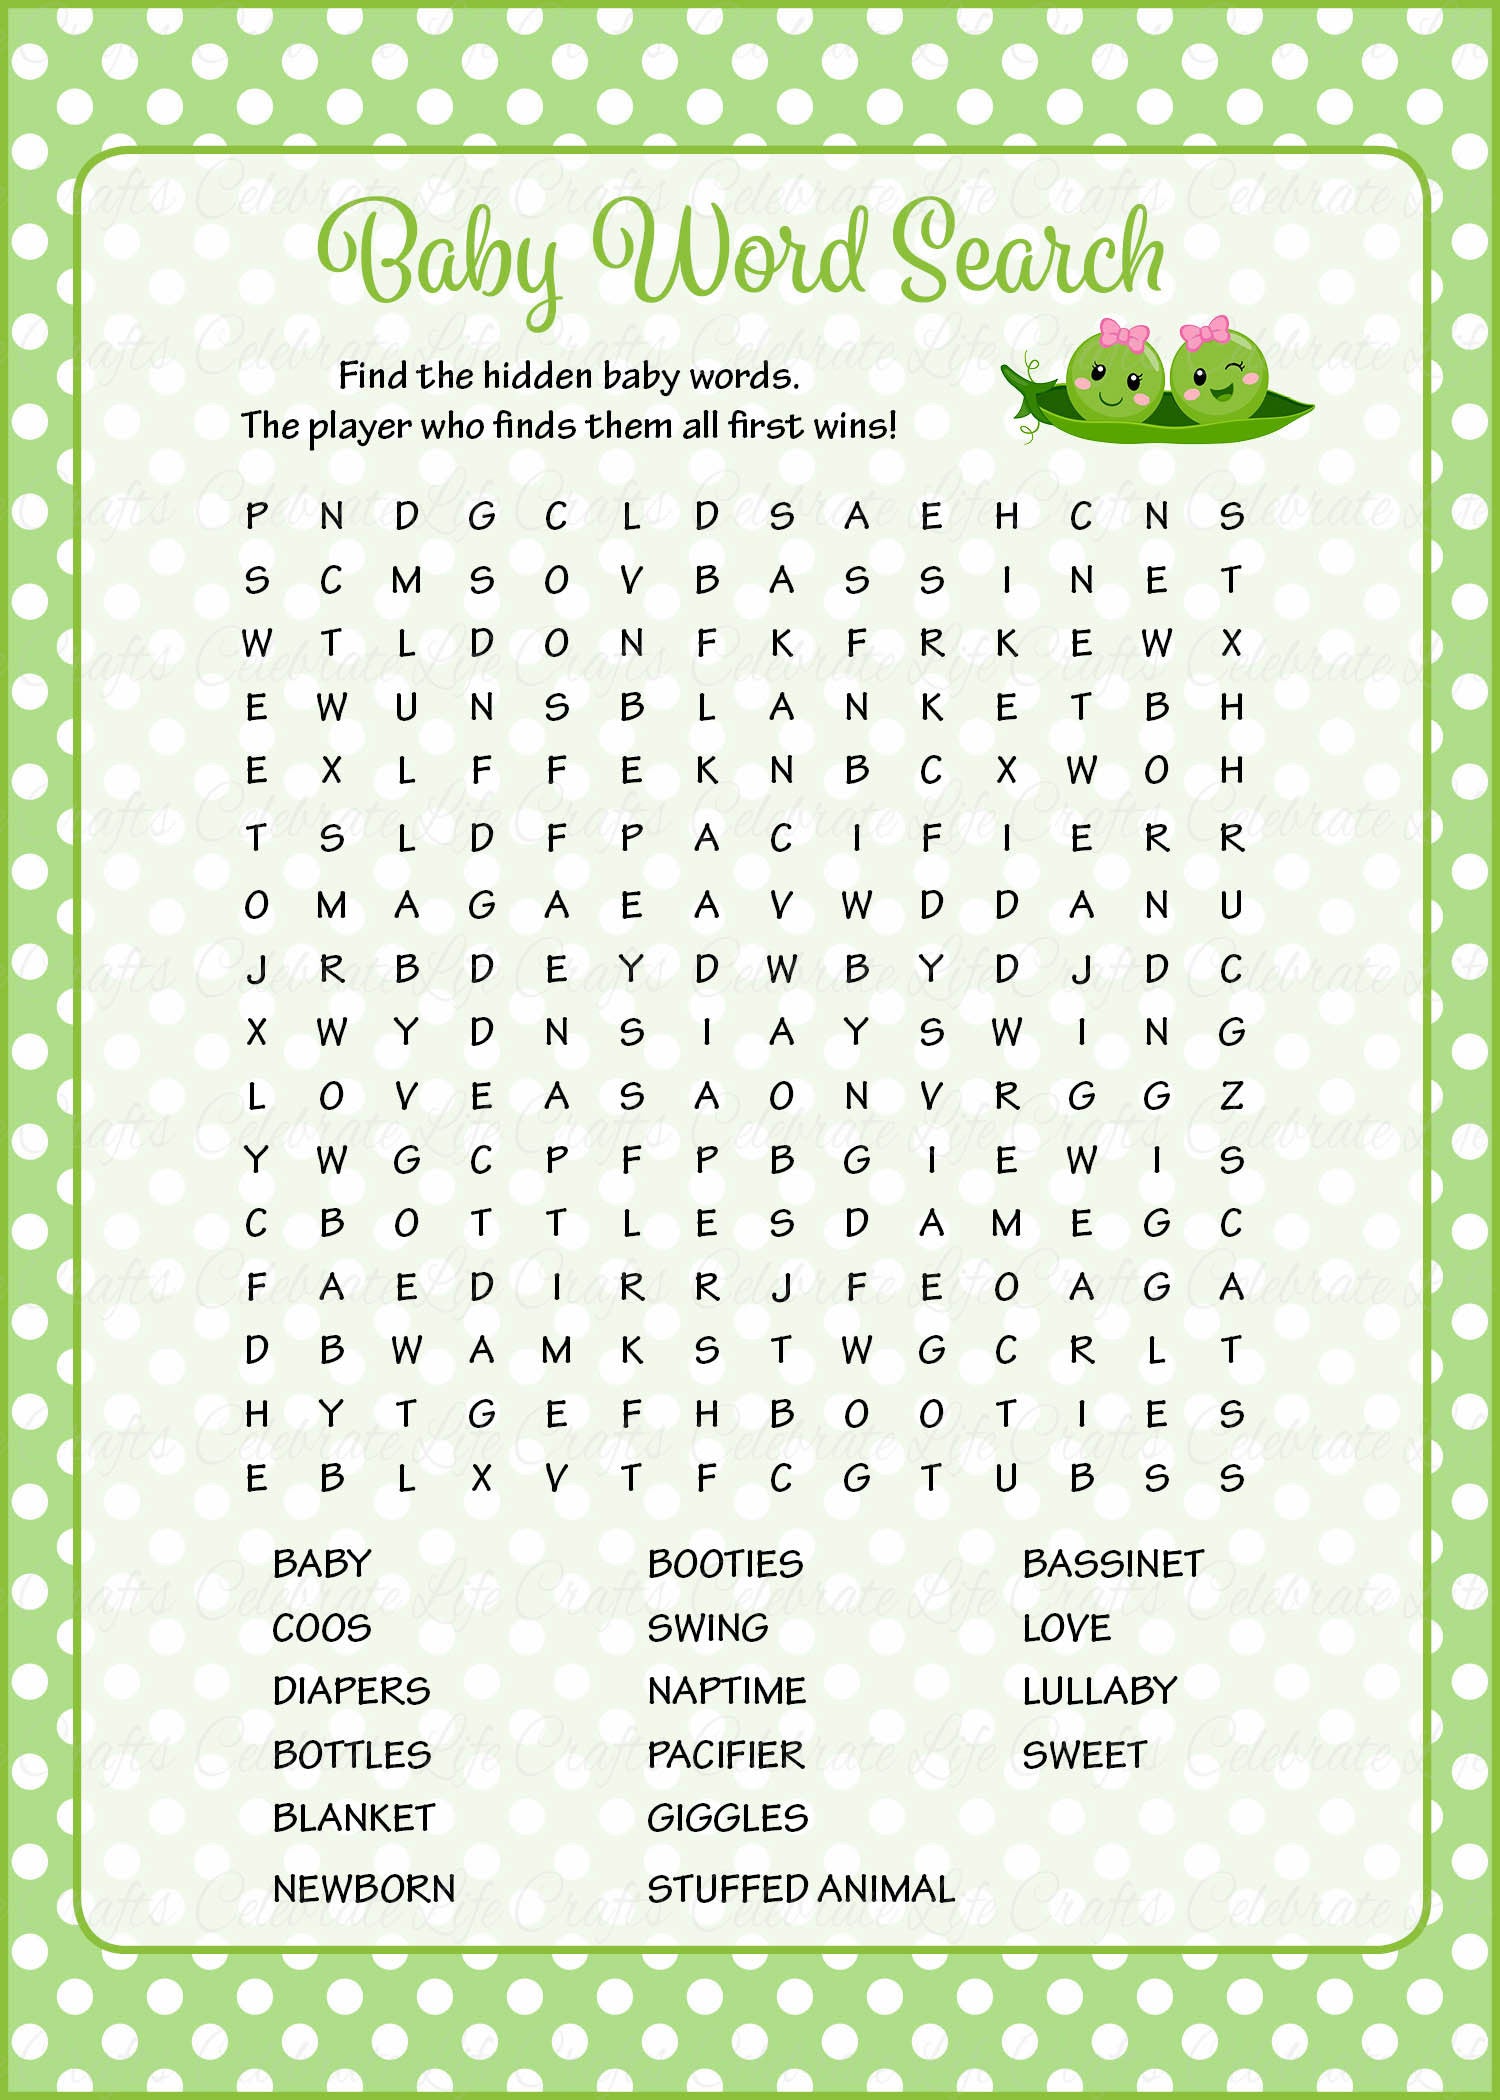 Word Search Baby Shower Game - Peas in a Pod Baby Shower for Baby Girl Twins - Green Dots – Life Crafts